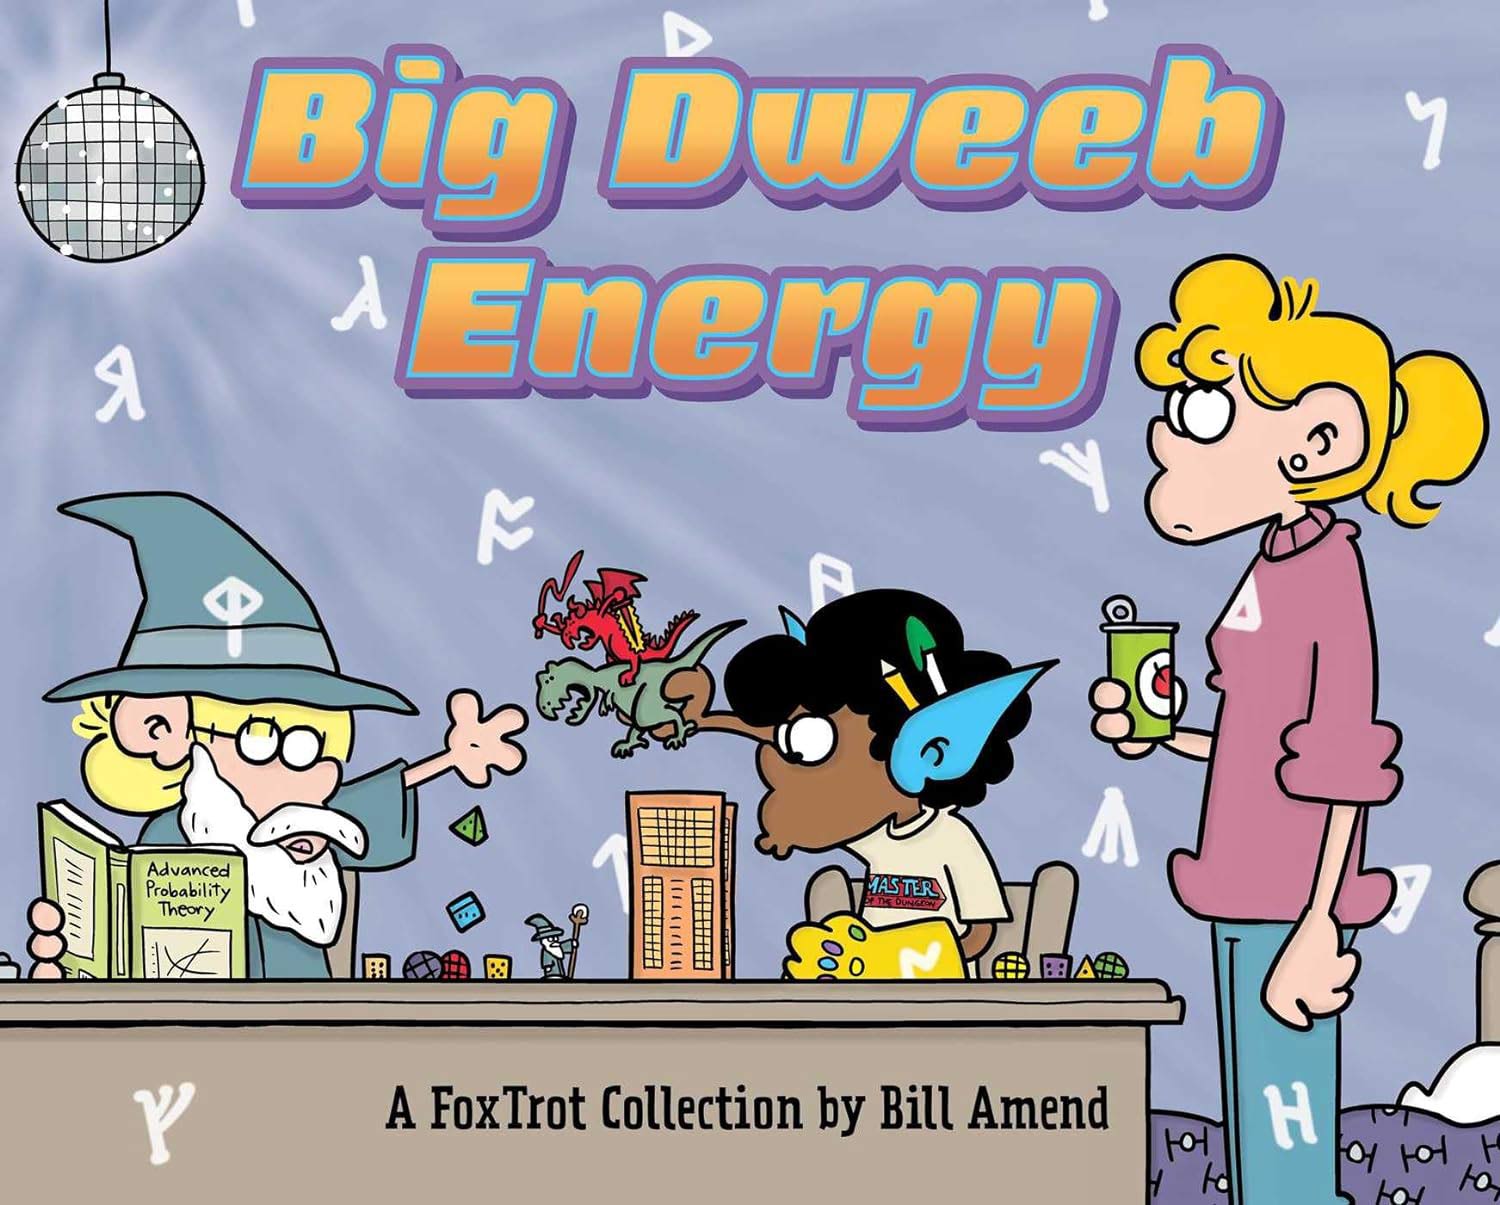 Big Dweeb Energy: A FoxTrot Collection by Bill Amend